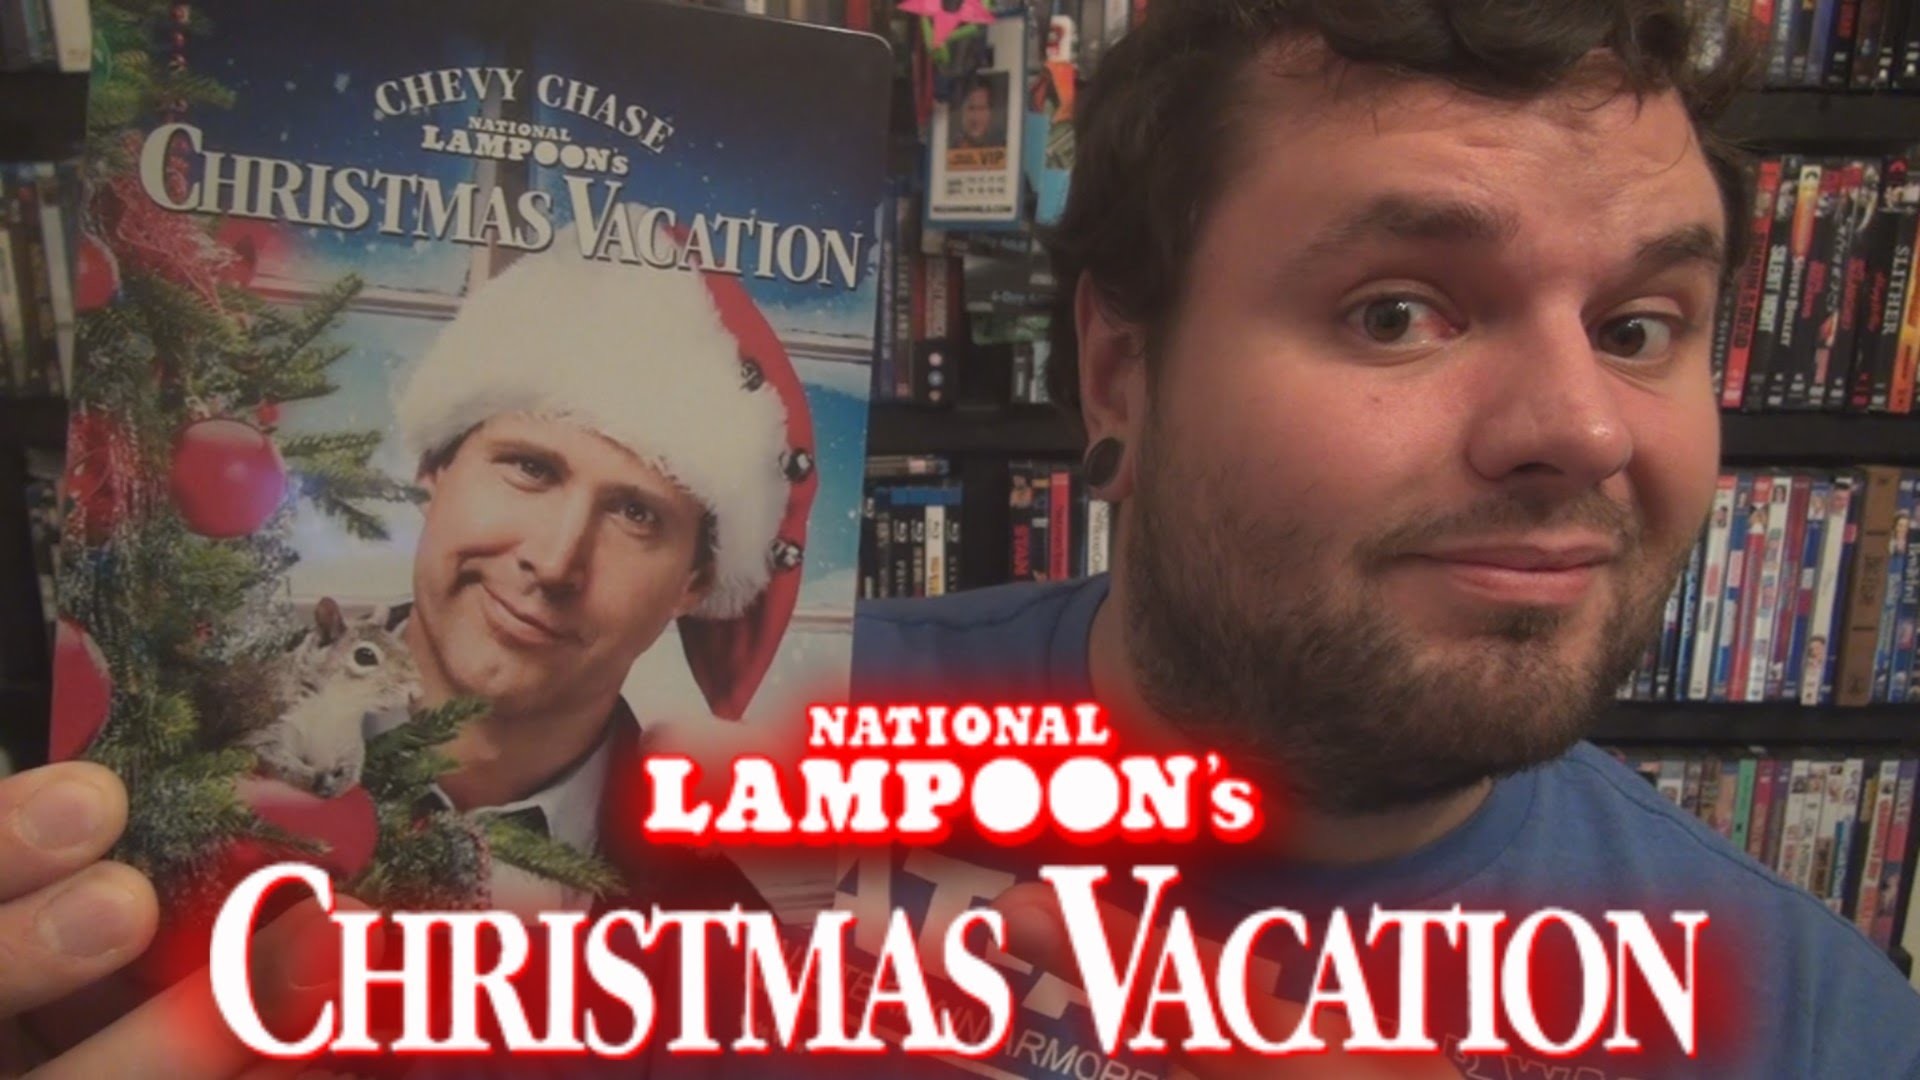 1920x1080 Christmas Vacation 25th Anniversary Steelbook Unboxing